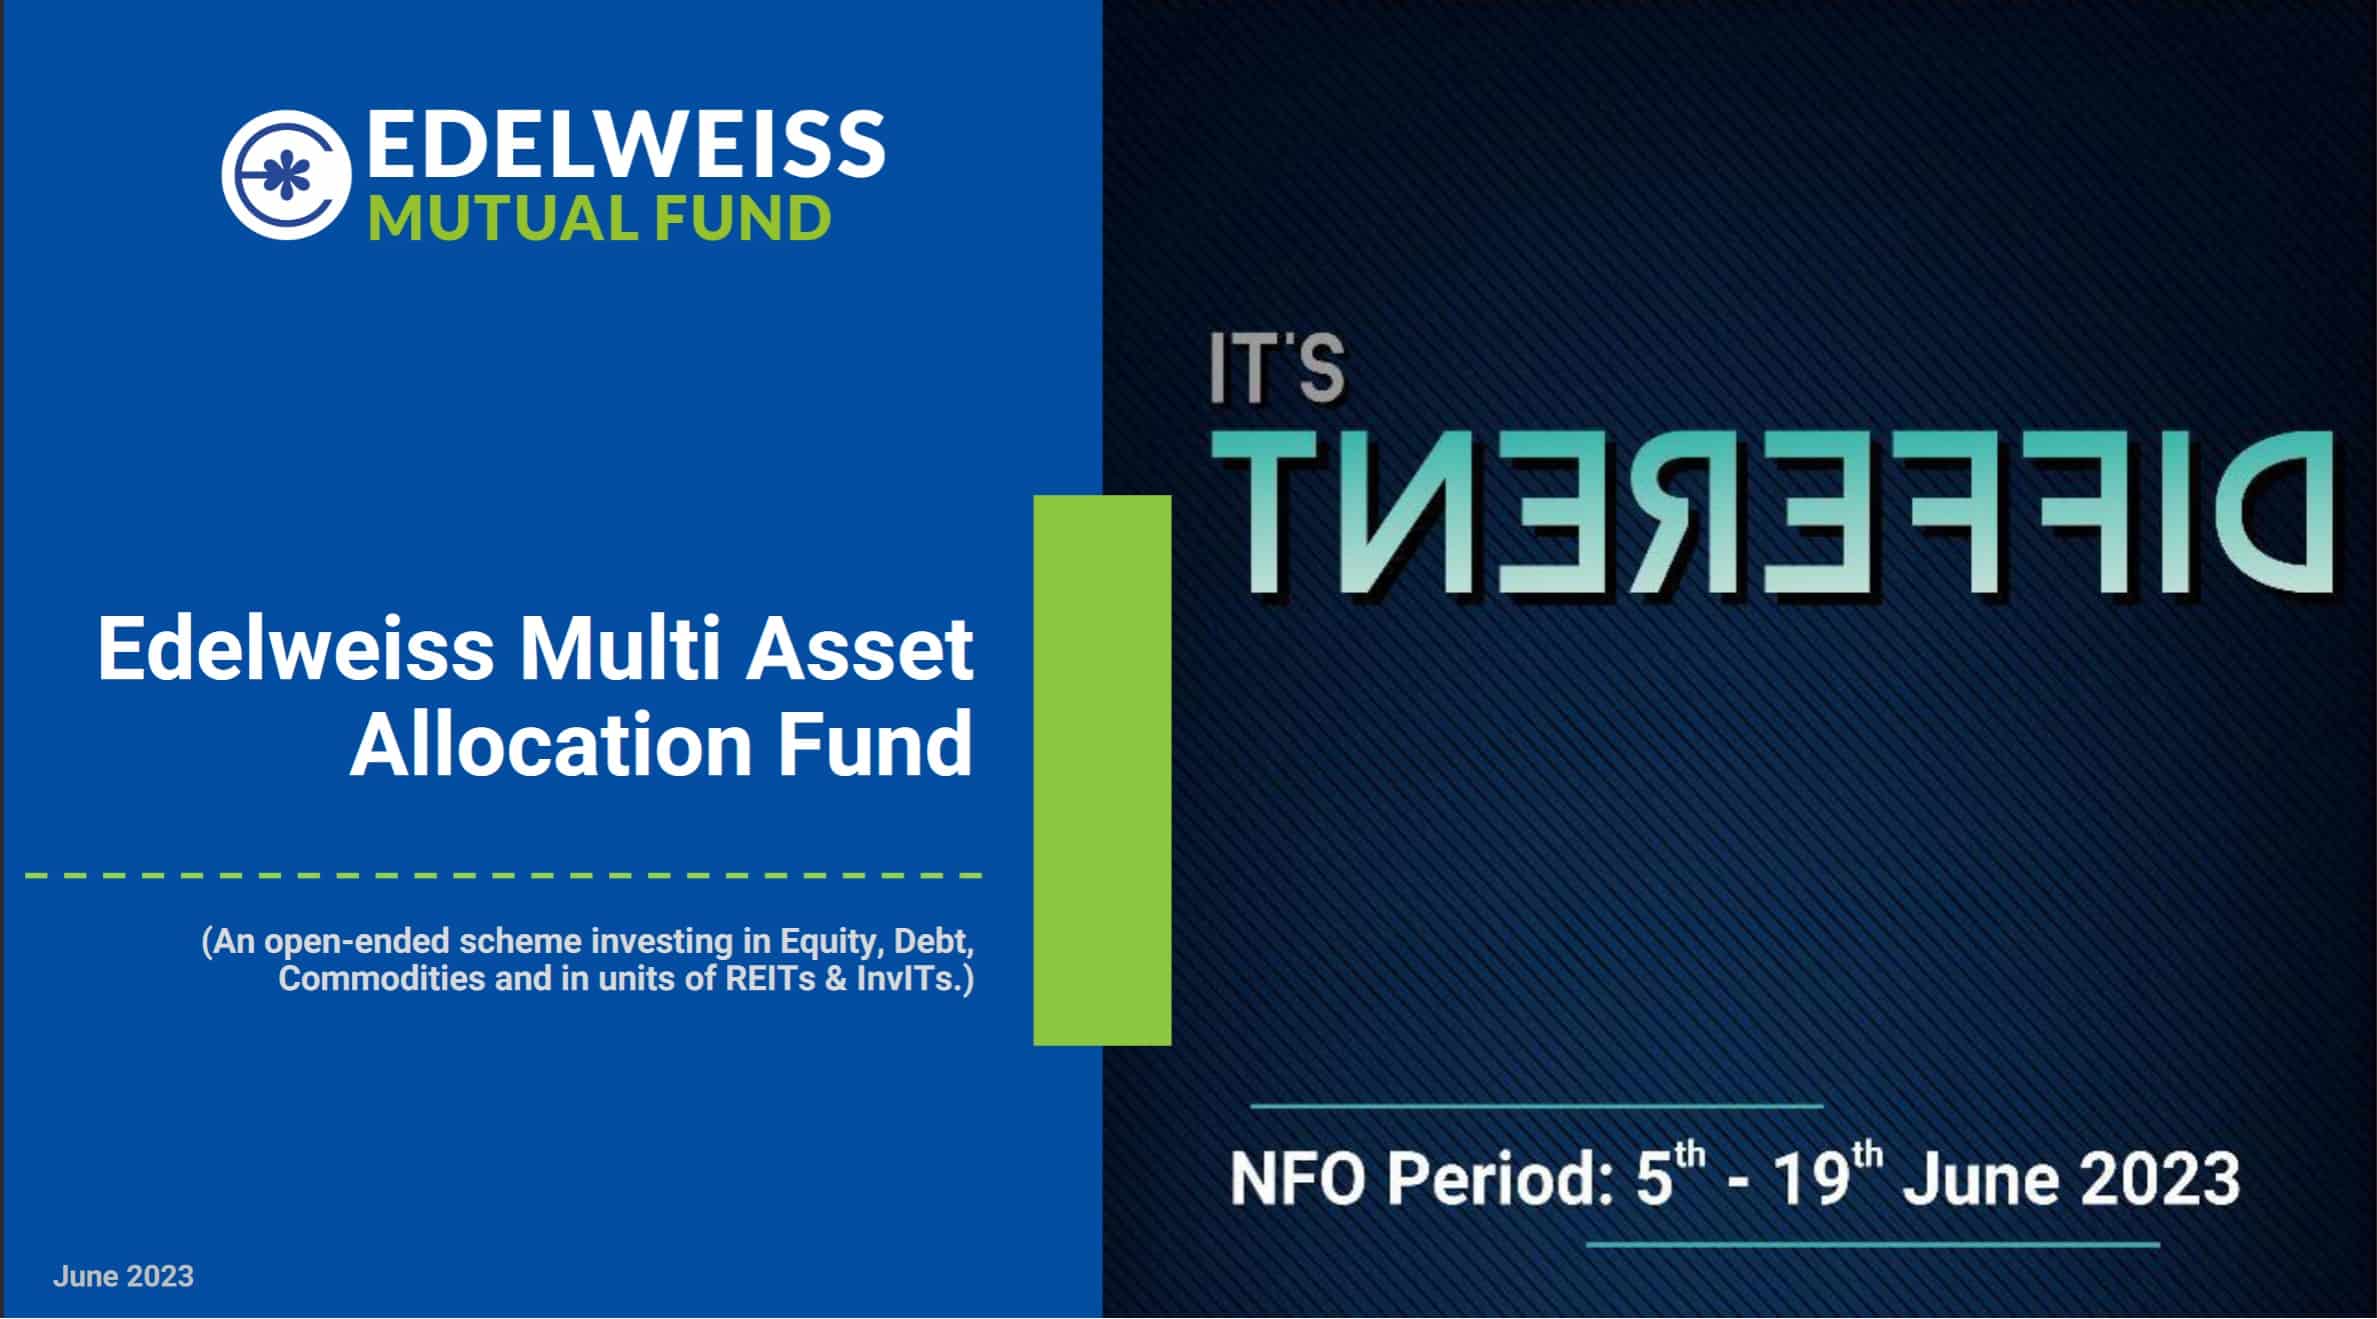 can-i-invest-in-edelweiss-multi-asset-allocation-fund-for-higher-tax